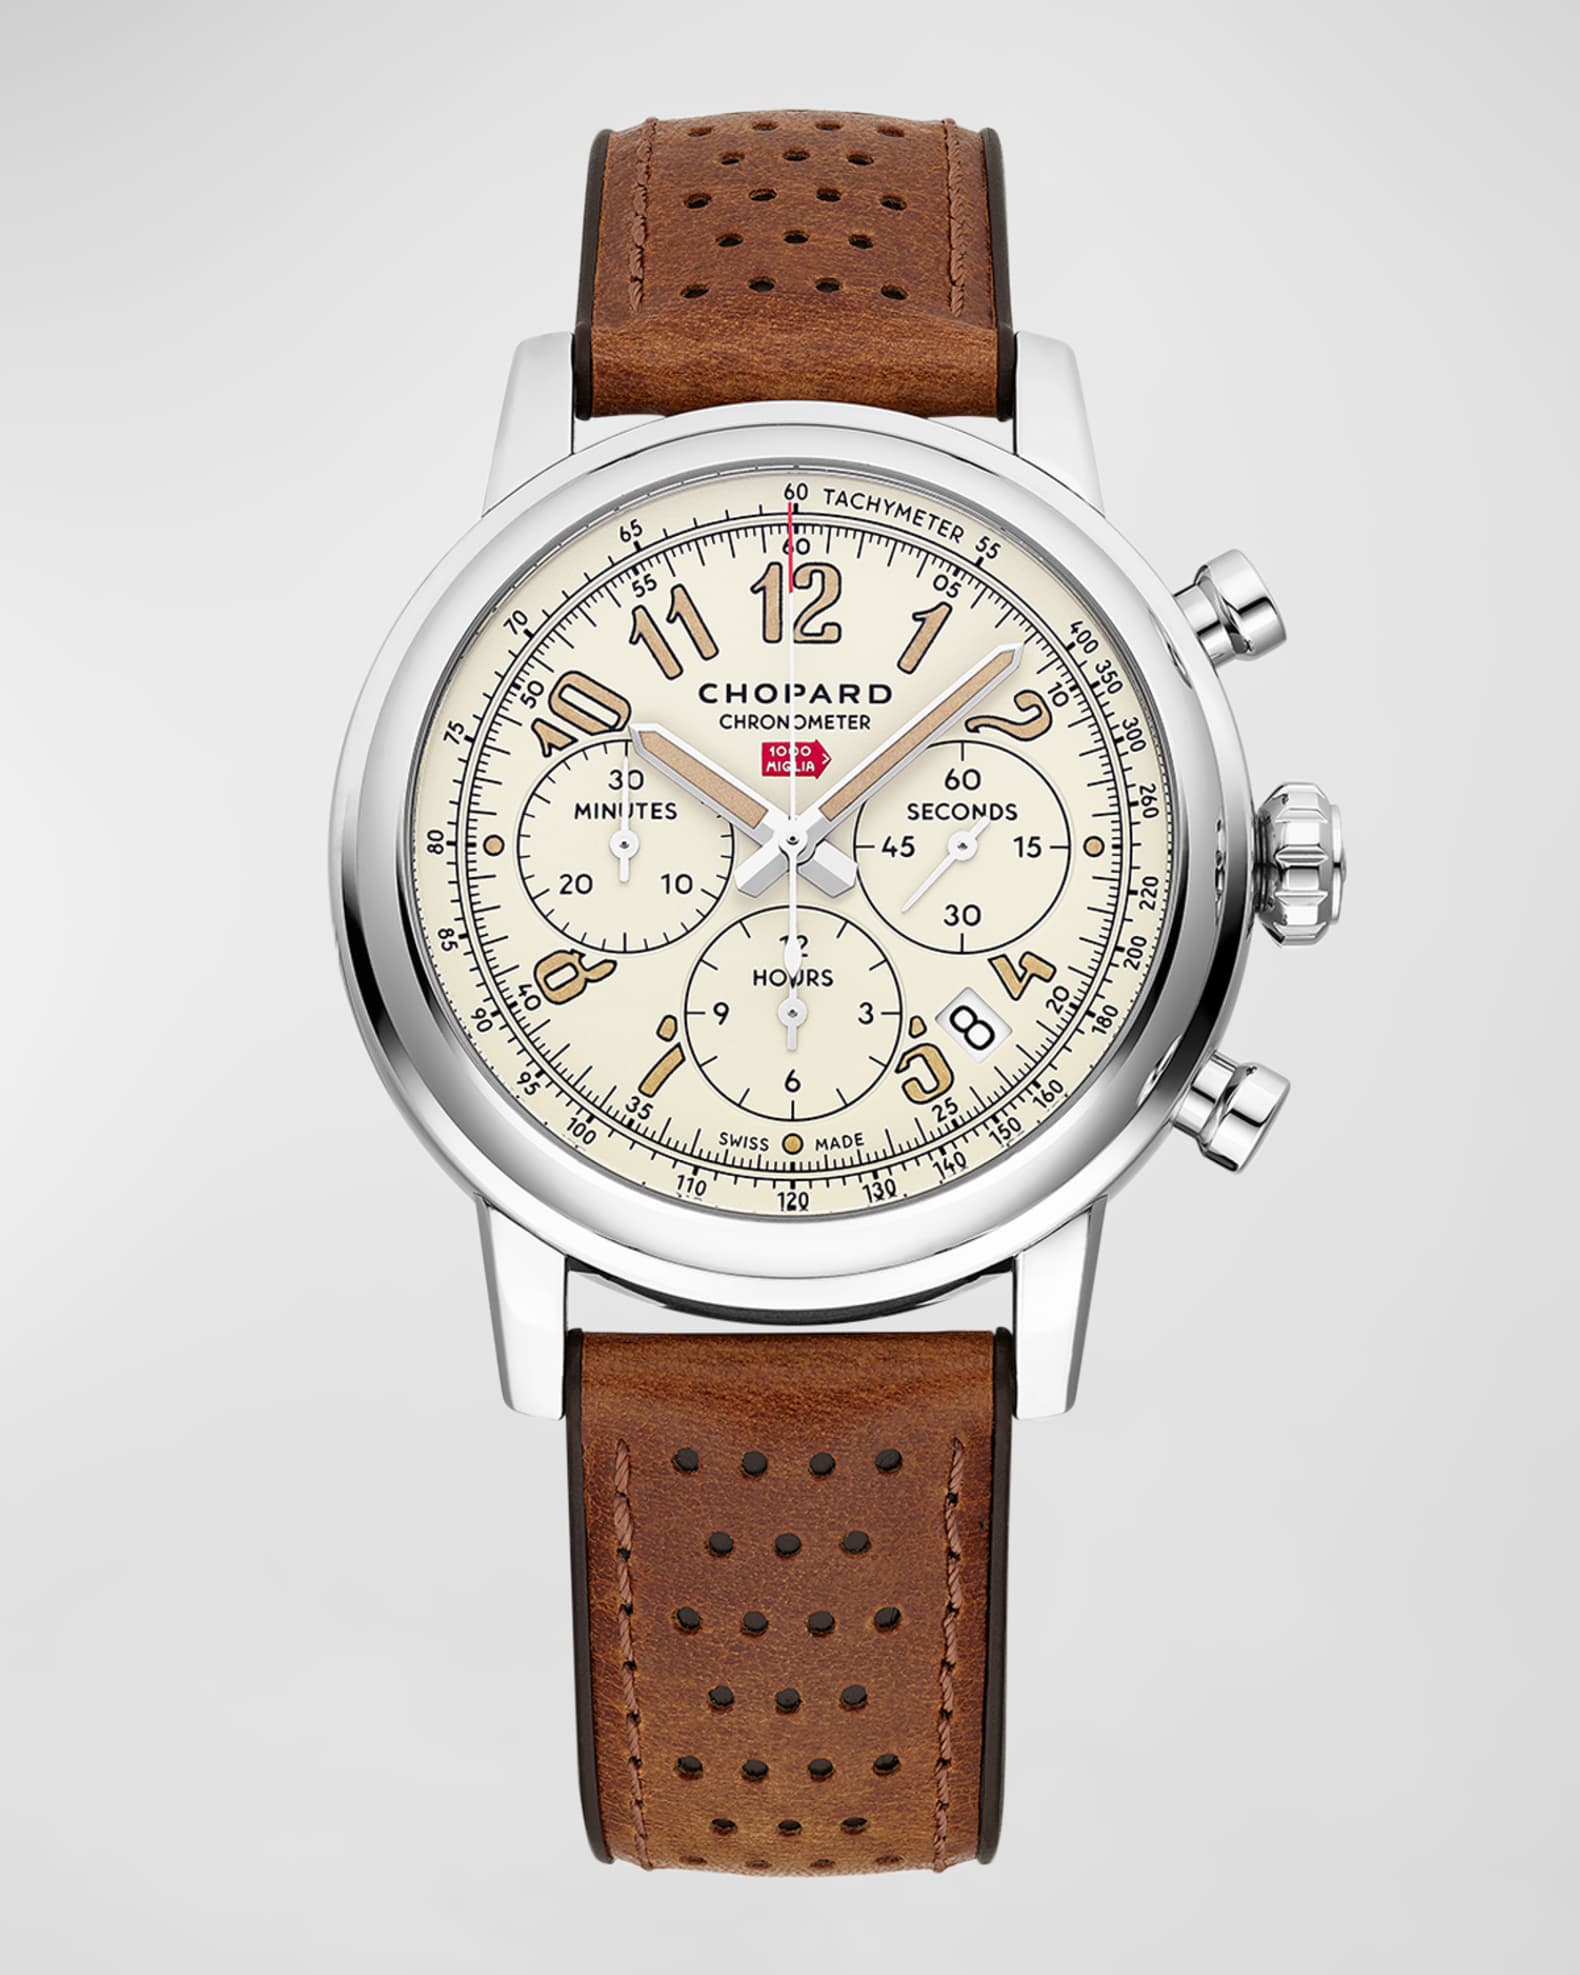 Introducing The New Chopard Mille Miglia Classic Chronograph